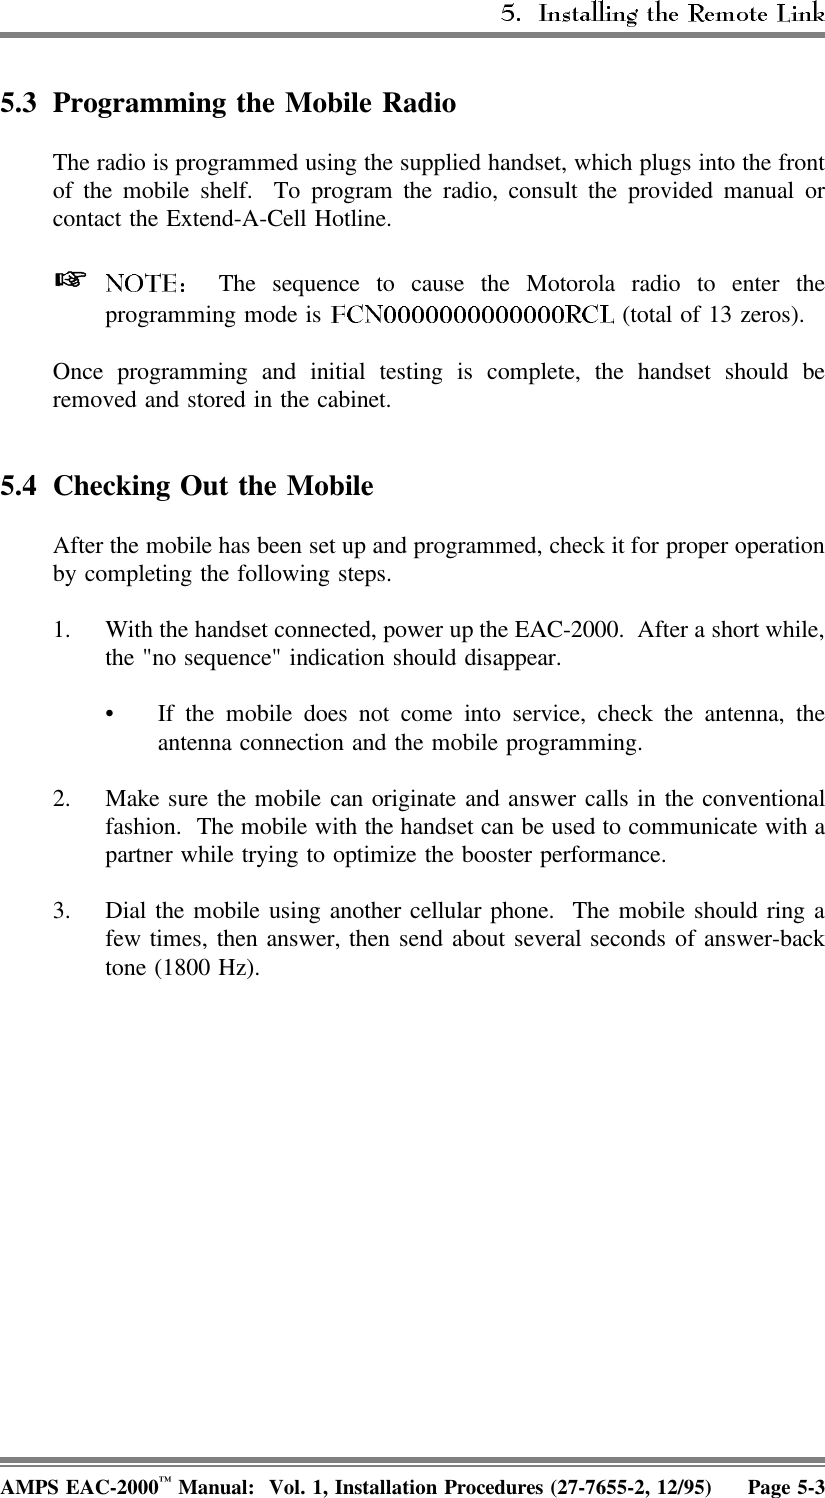 5.3 Programming the Mobile Radio The radio is programmed using the supplied handset, which plugs into the frontof the mobile shelf.  To program the radio, consult the provided manual orcontact the Extend-A-Cell Hotline.   The sequence to cause the Motorola radio to enter theprogramming mode is   (total of 13 zeros).Once programming and initial testing is complete, the handset should beremoved and stored in the cabinet.5.4 Checking Out the MobileAfter the mobile has been set up and programmed, check it for proper operationby completing the following steps. 1. With the handset connected, power up the EAC-2000.  After a short while,the &quot;no sequence&quot; indication should disappear.• If the mobile does not come into service, check the antenna, theantenna connection and the mobile programming.2. Make sure the mobile can originate and answer calls in the conventionalfashion.  The mobile with the handset can be used to communicate with apartner while trying to optimize the booster performance.3. Dial the mobile using another cellular phone.  The mobile should ring afew times, then answer, then send about several seconds of answer-backtone (1800 Hz).AMPS EAC-2000™ Manual:  Vol. 1, Installation Procedures (27-7655-2, 12/95) Page 5-3